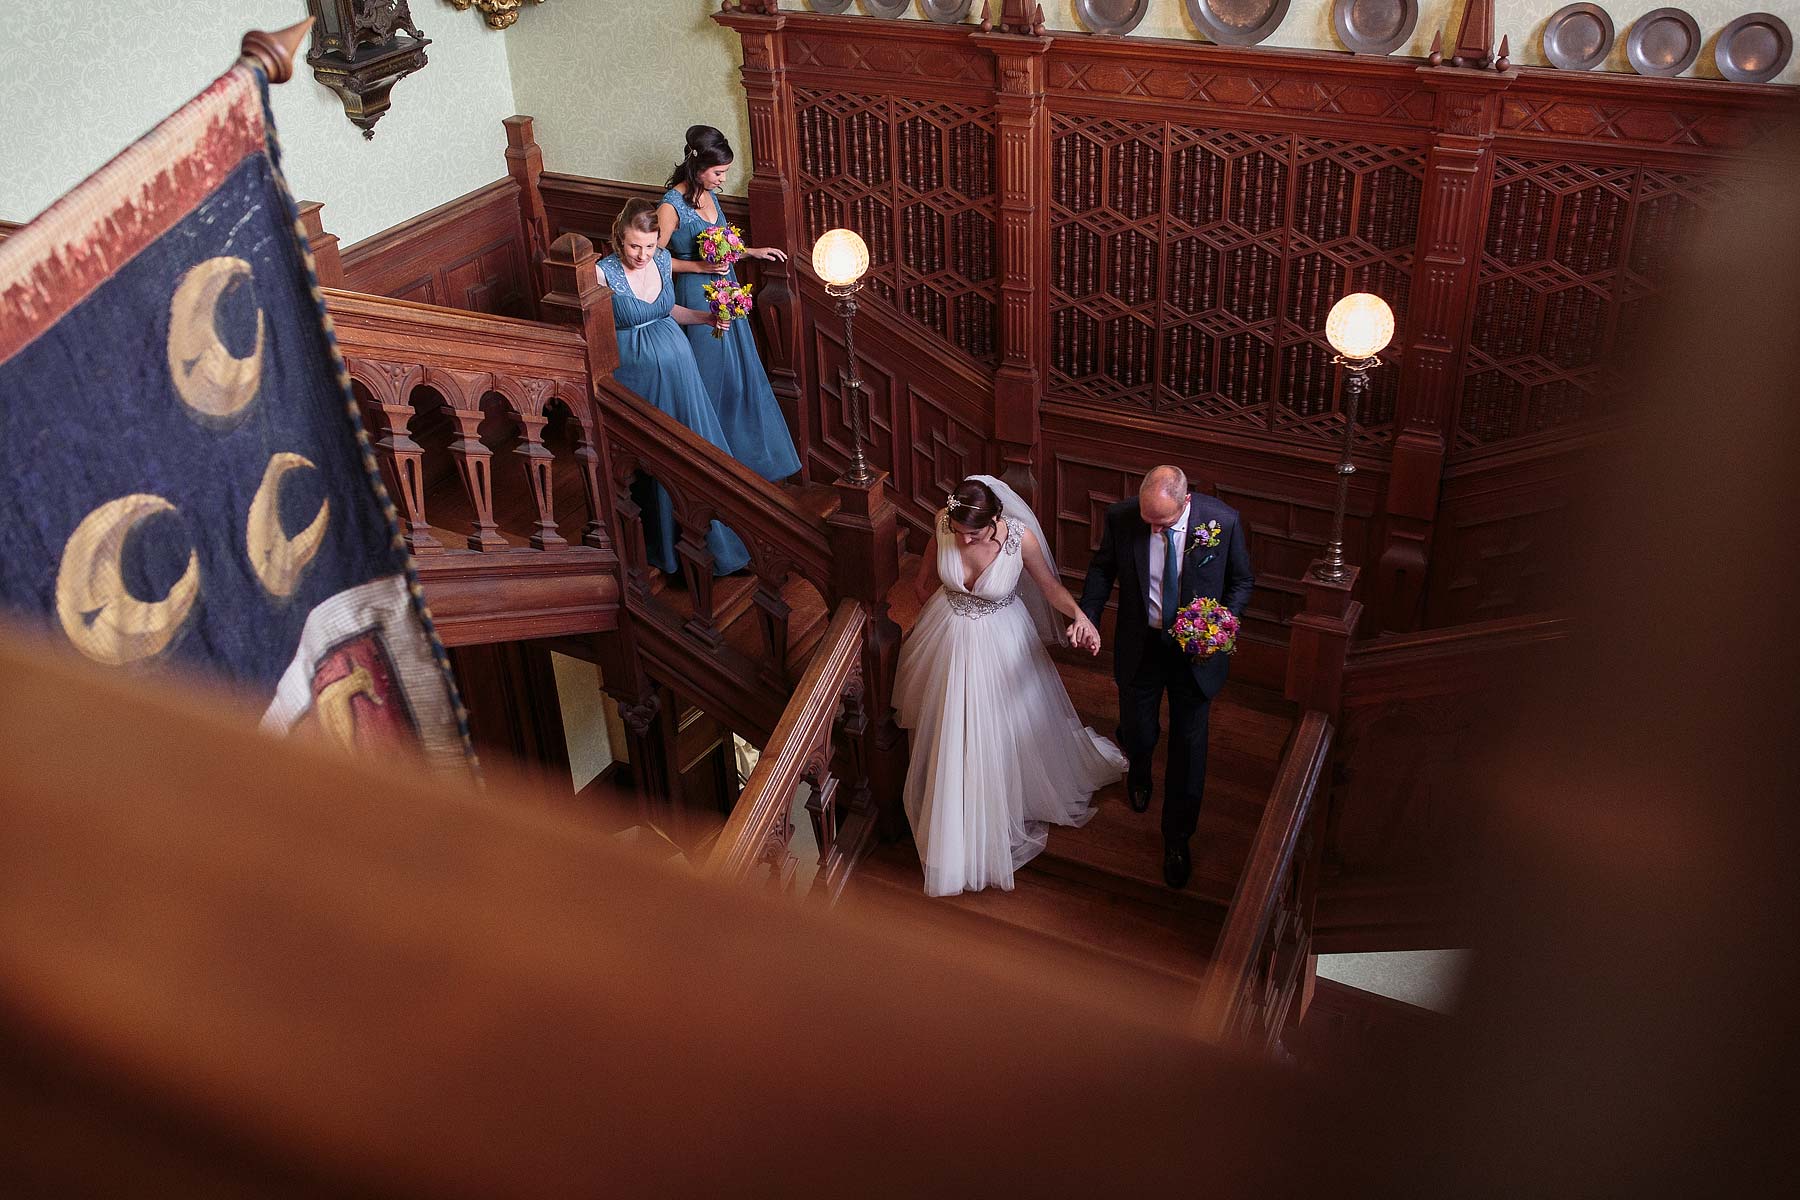 Capturing the procession of the Bride and Bridal party at Sandon Hall in Stafford by Stafford Reportage Wedding Photographer Stuart James